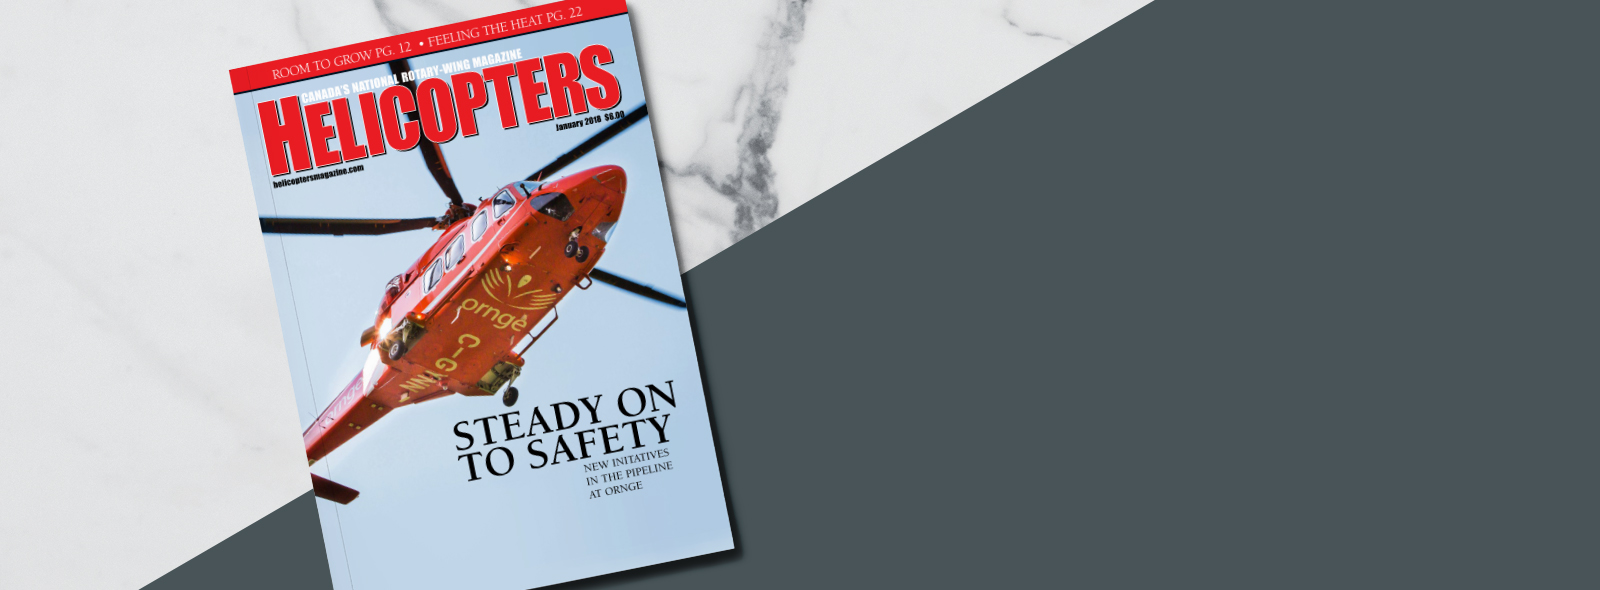 Helicopters magazine cover with belly of Ornge AW139